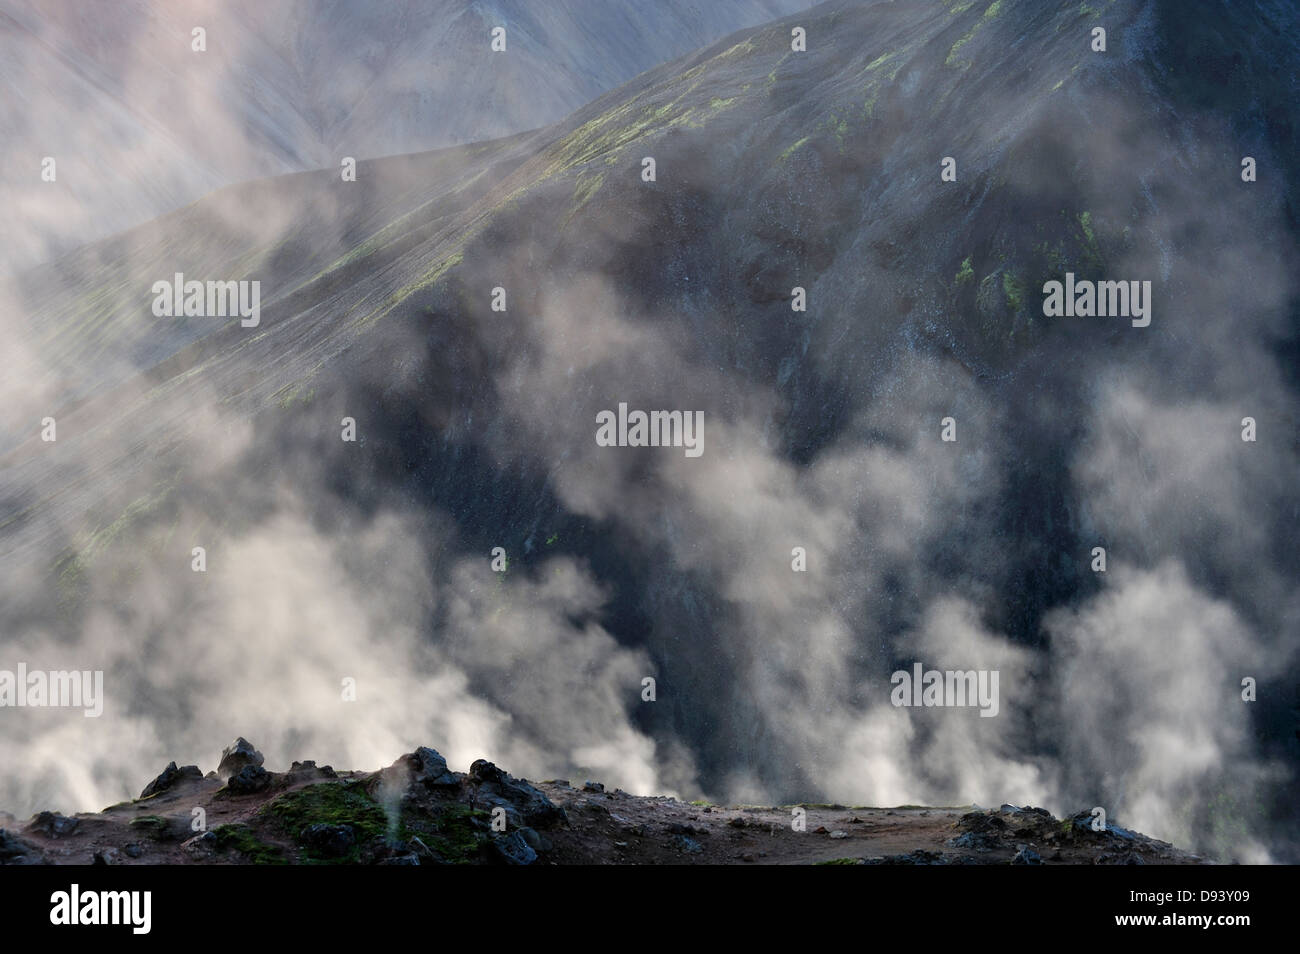 Smoke coming out of hot springs Stock Photo